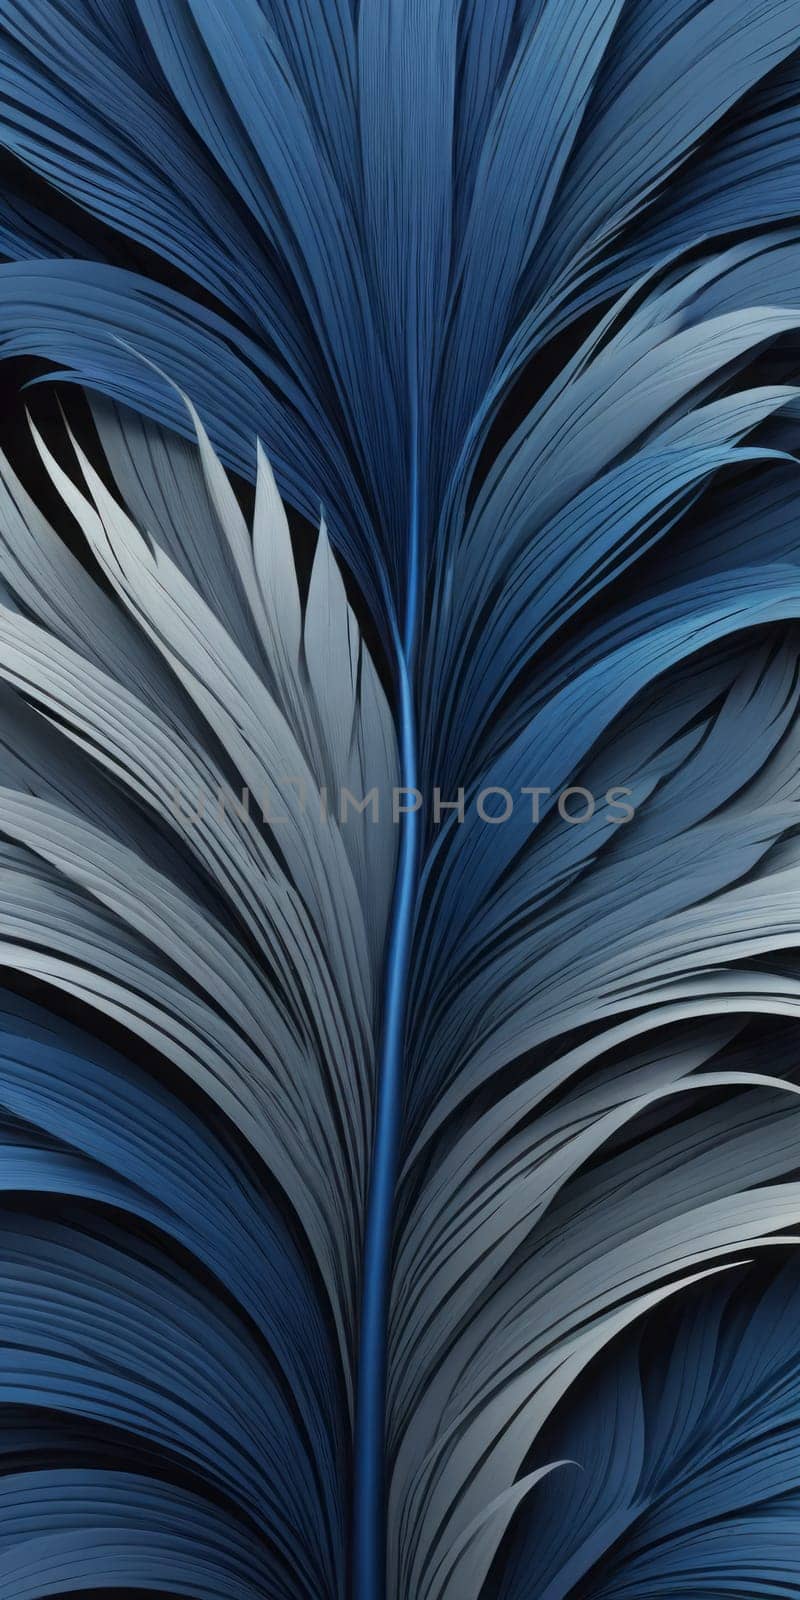 Feathered Shapes in Gray Midnightblue by nkotlyar